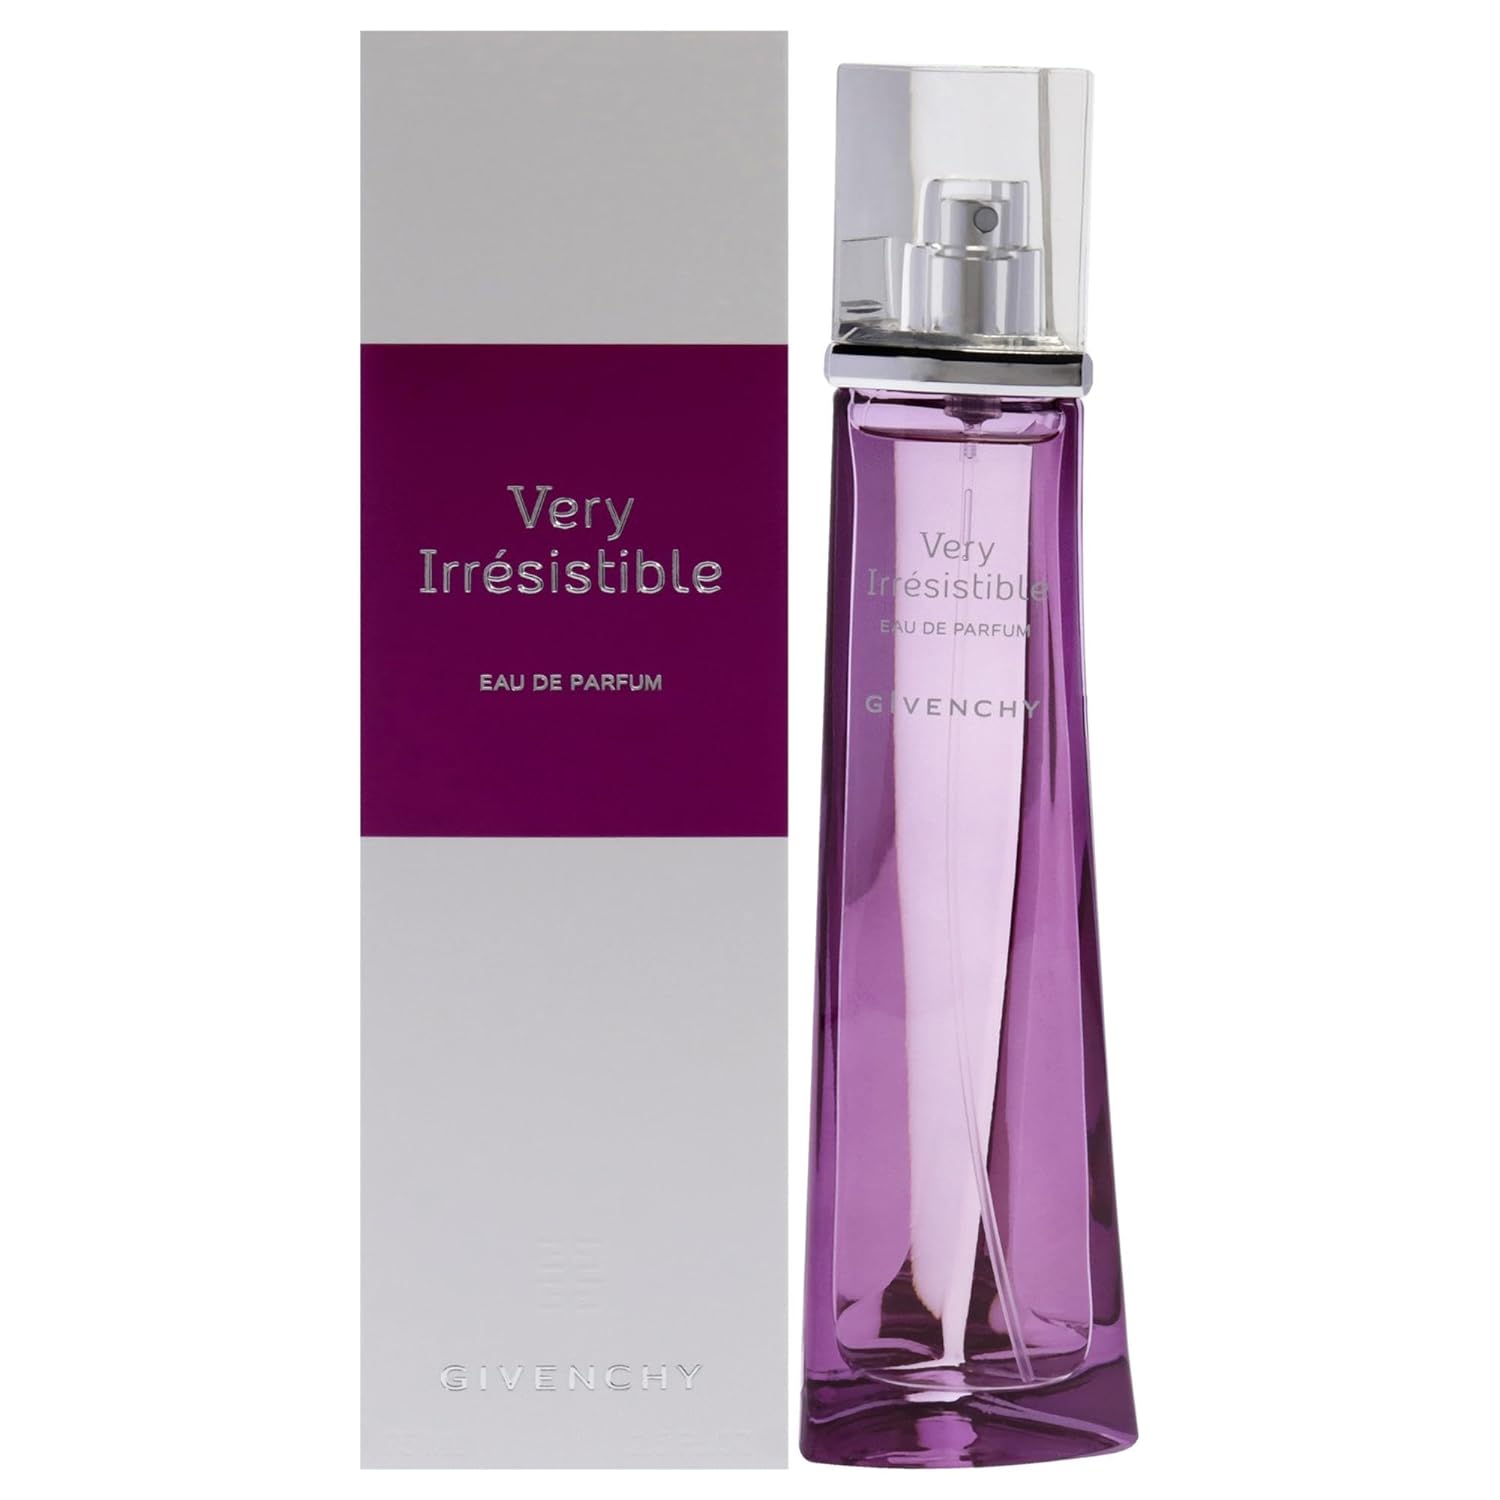 Very Irresistible by Givenchy 2.5 oz EDP Spray for Women